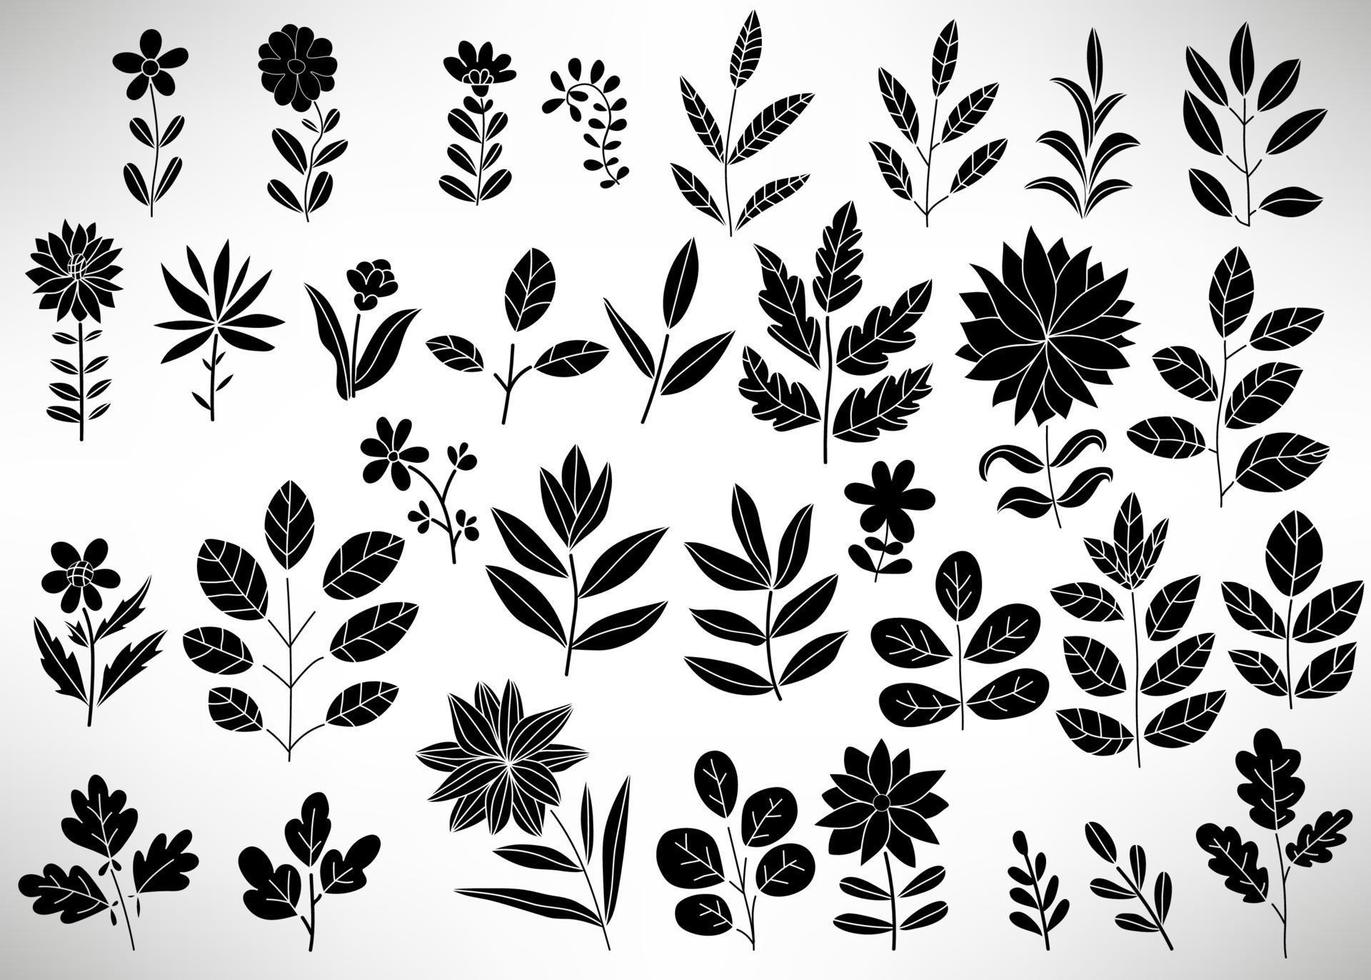 Floral Set of black hand drawn floral elements, tree branch, bush, plant, leaves, flowers, branches, petals isolated on white. Collection of flourish elements for design. vector